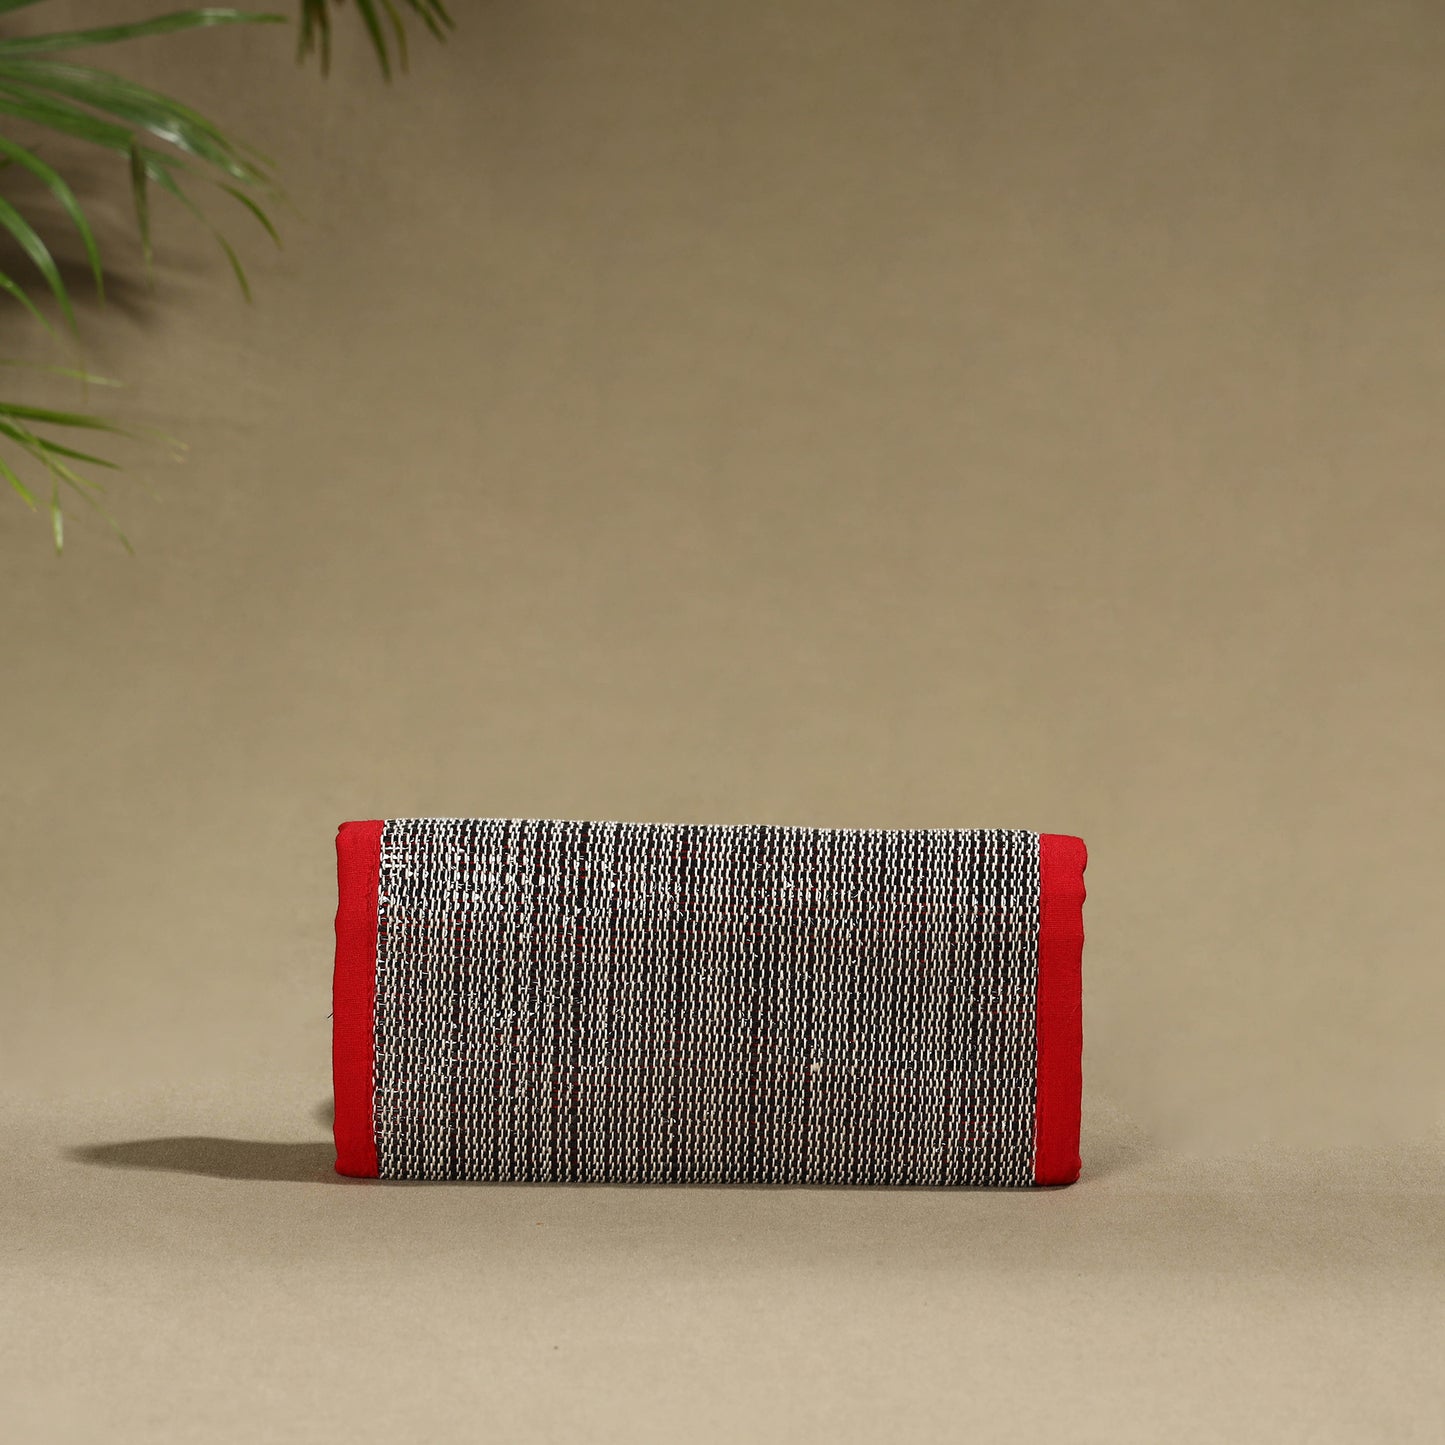 Handcrafted Audio Tape Clutch Wallet